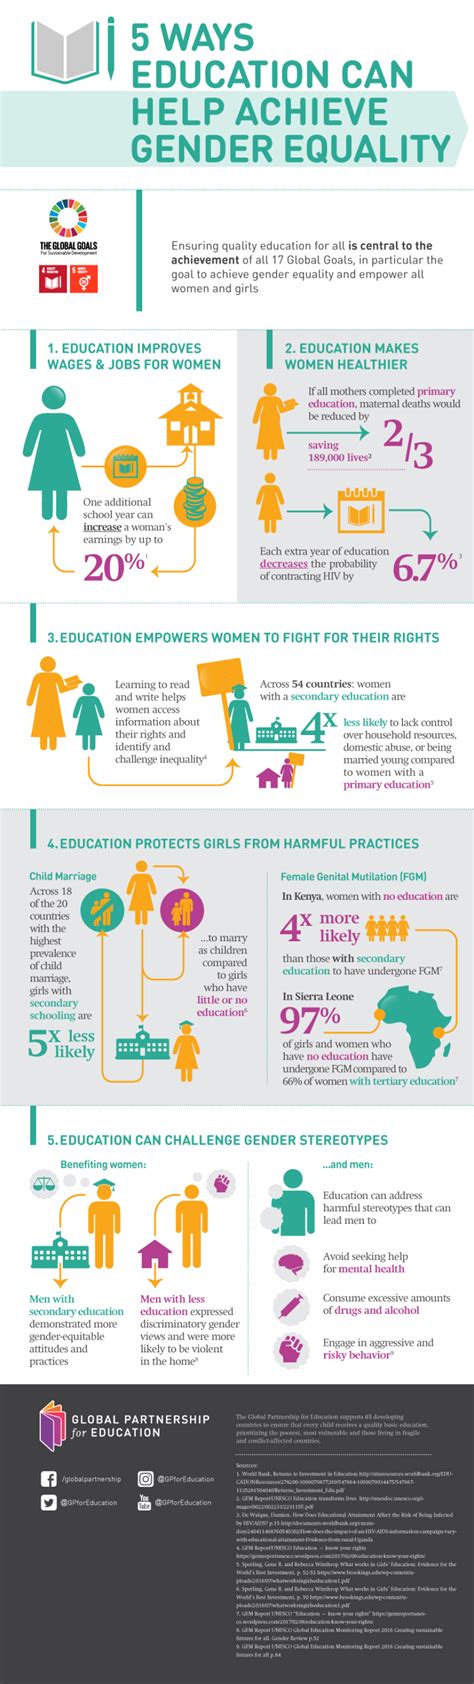 5 Ways Education Can Help Achieve Gender Equality Global Partnership